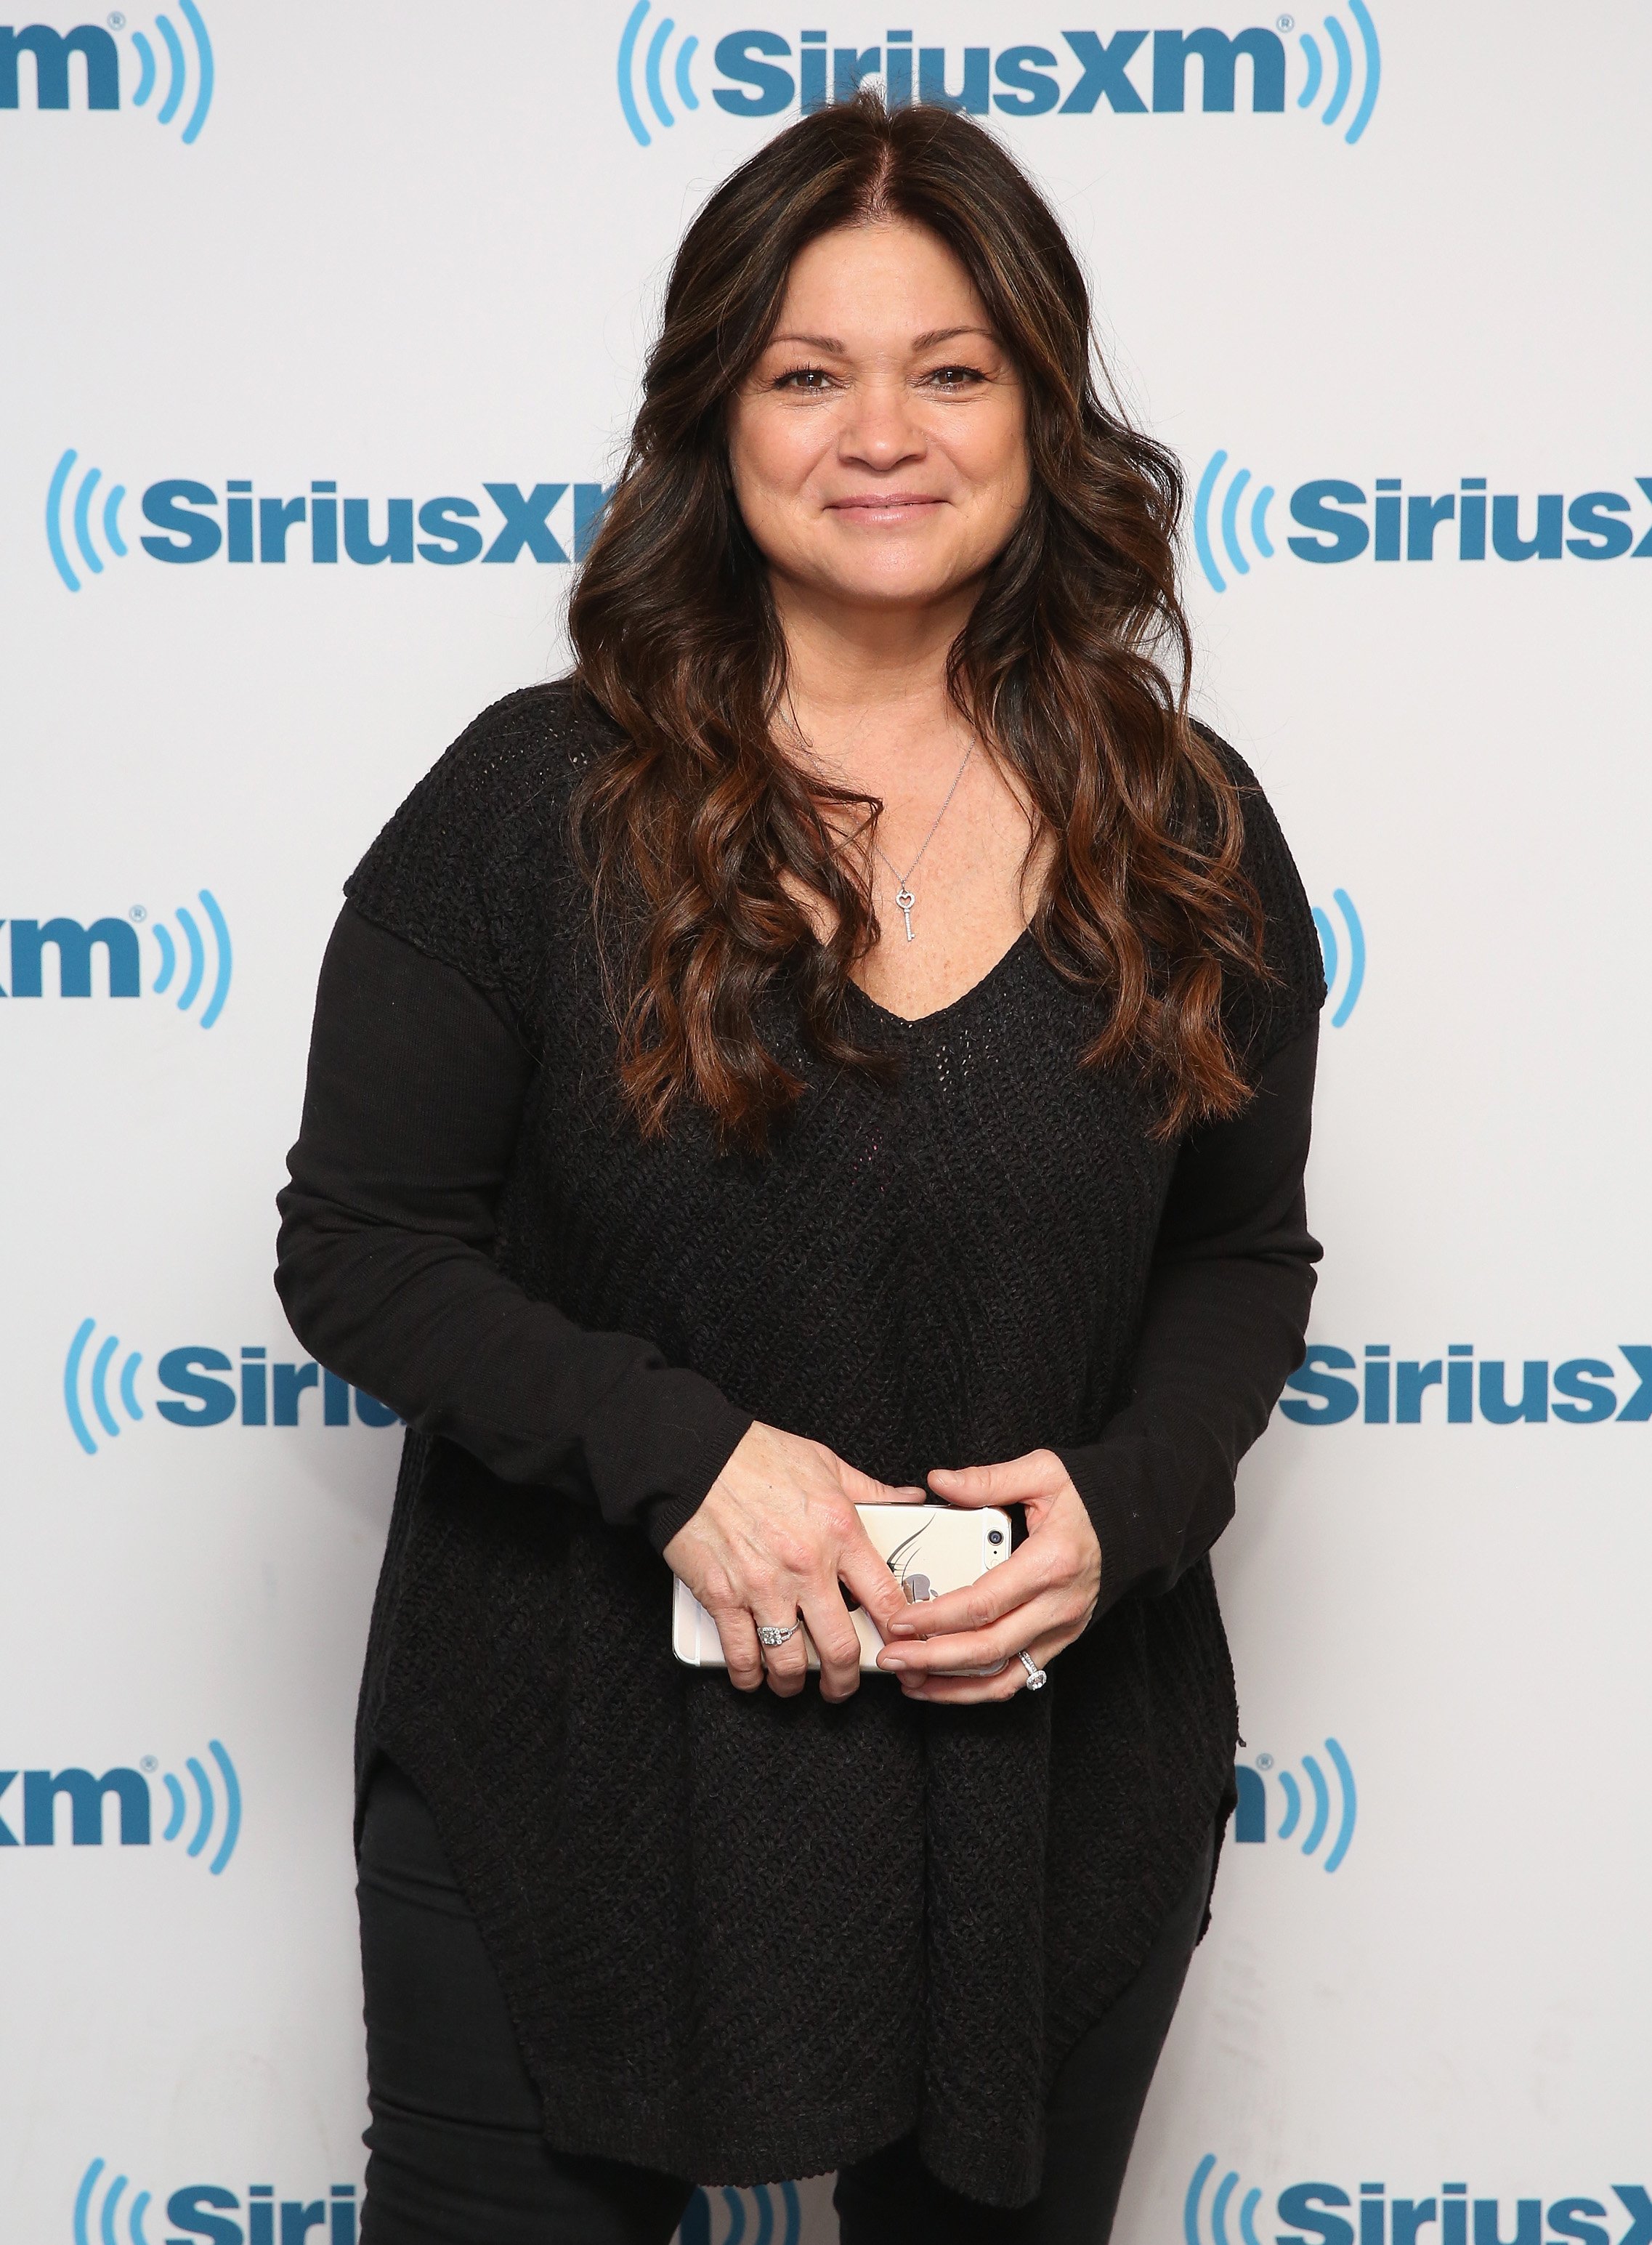 Valerie Bertinelli visits at SiriusXM Studios on October 16, 2015 in New York City. | Source: Getty Images